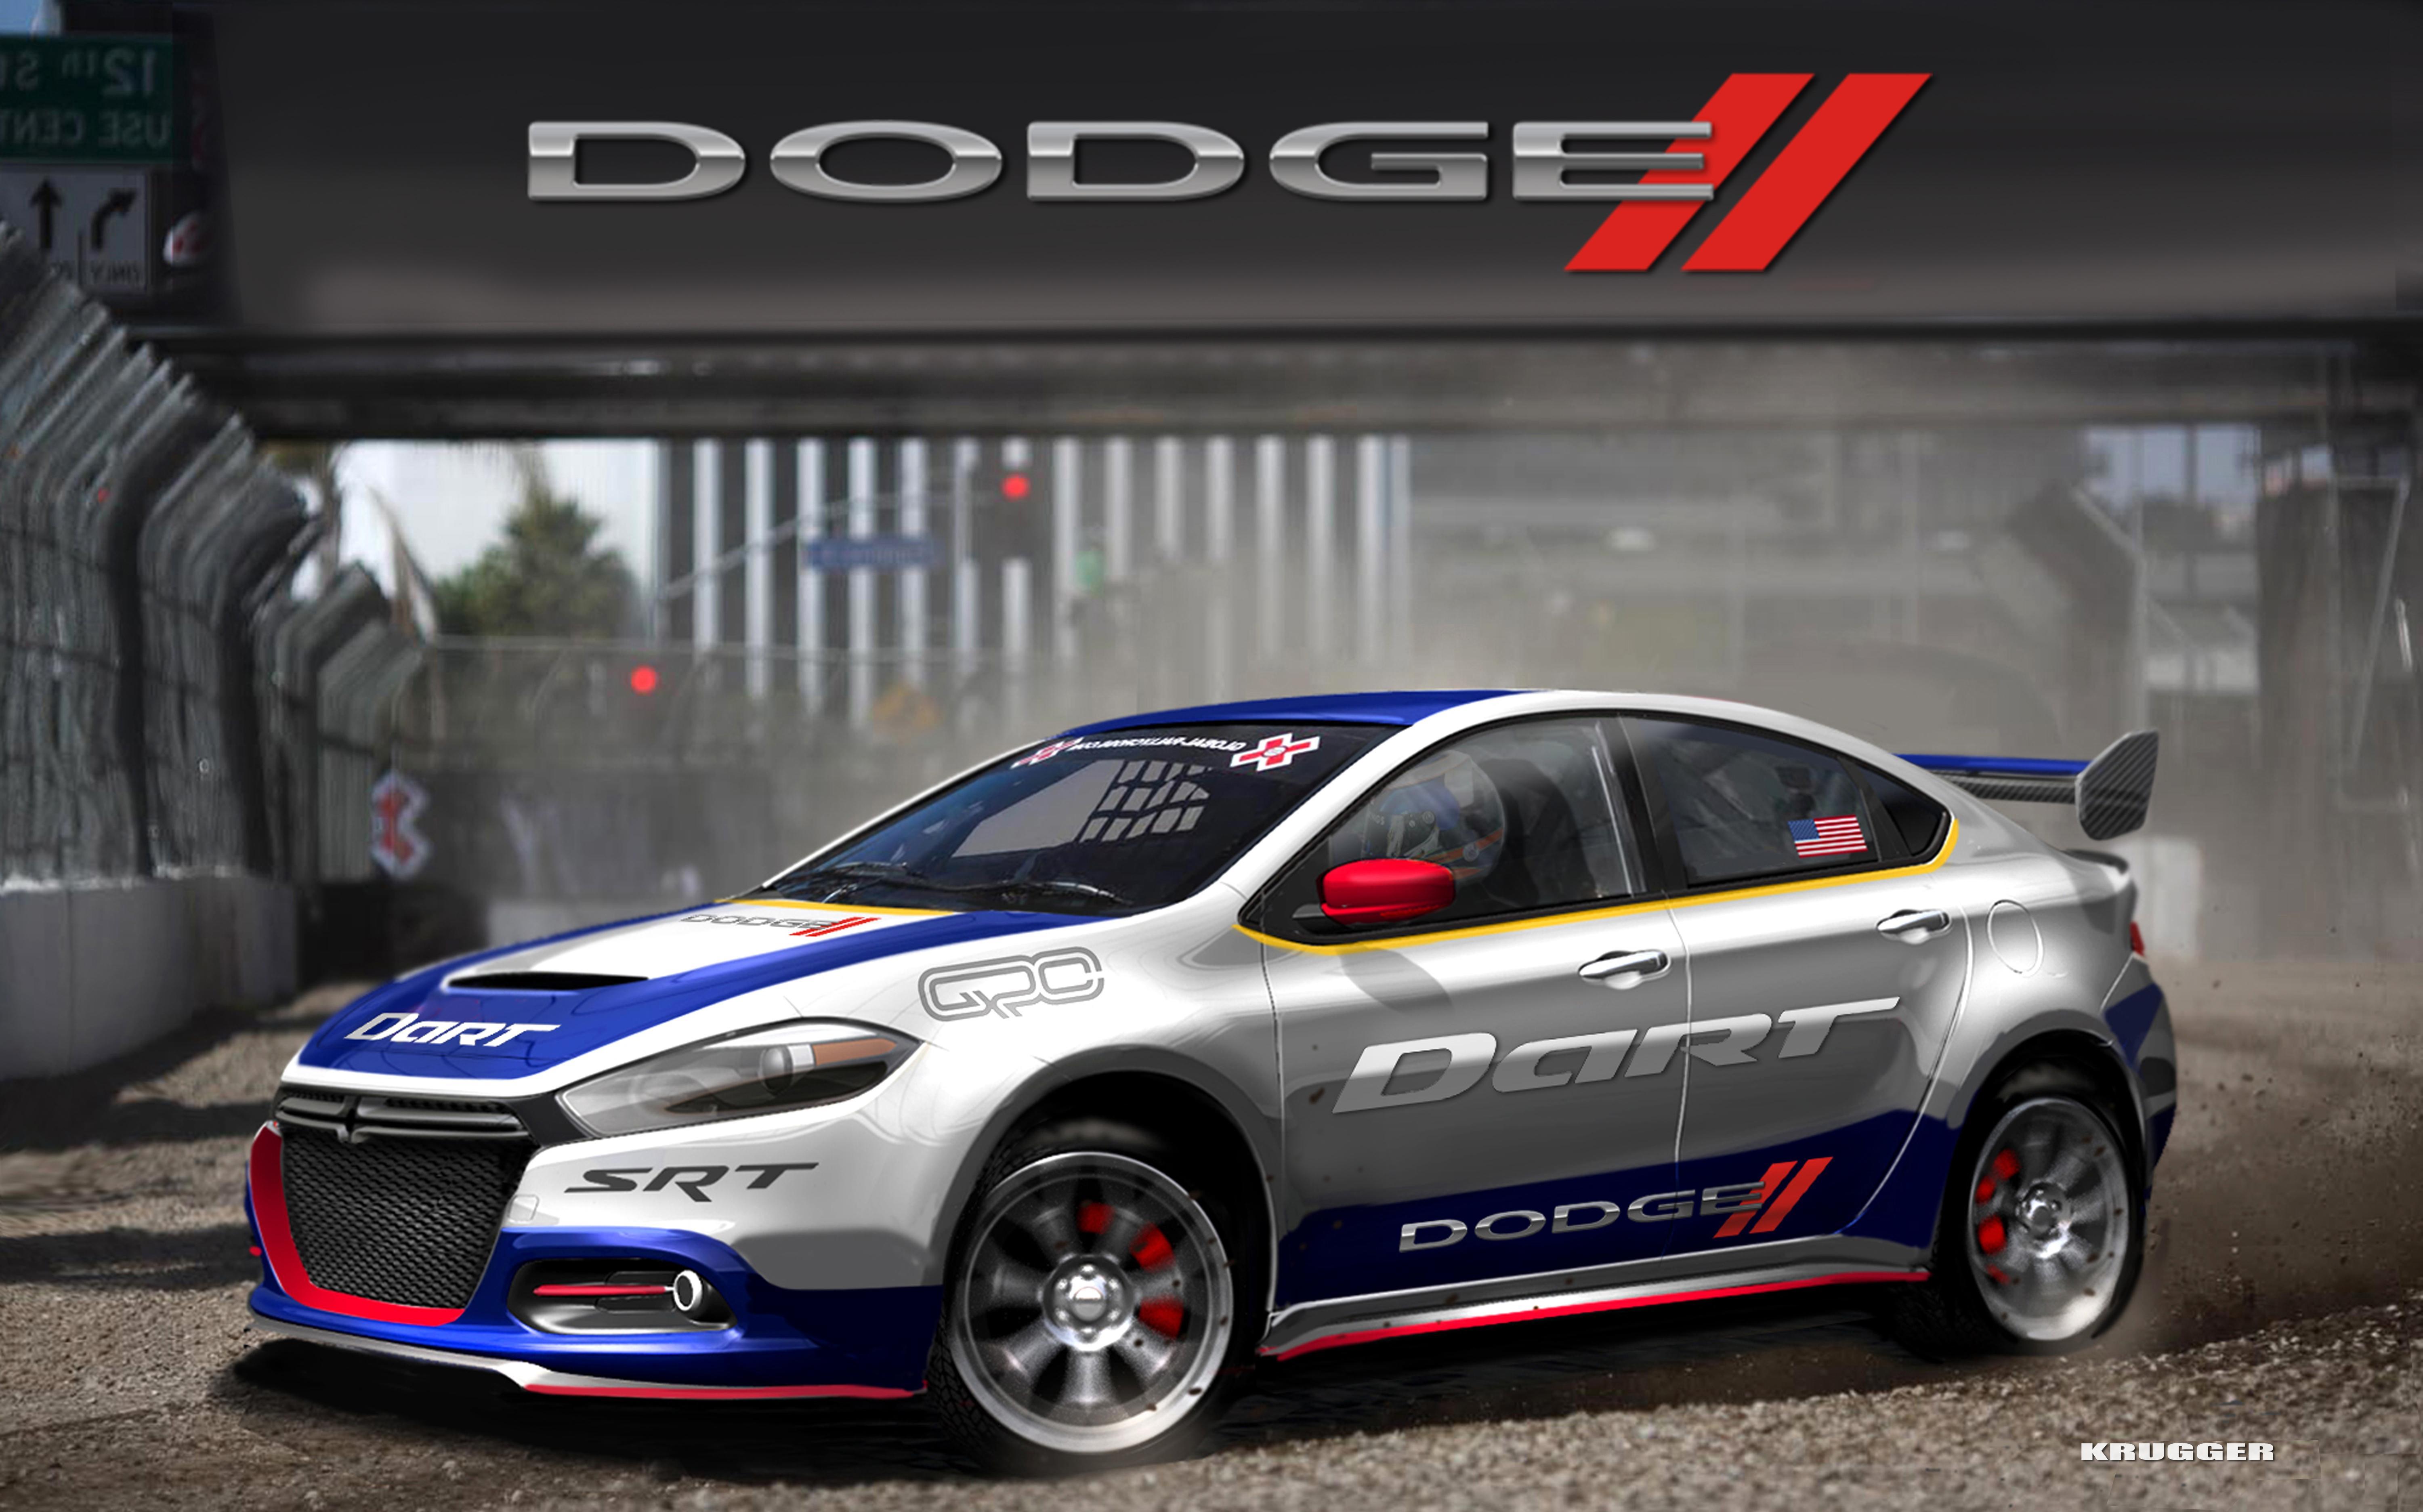 Dodge Dart Wallpaper HD Photo, Wallpaper and other Image